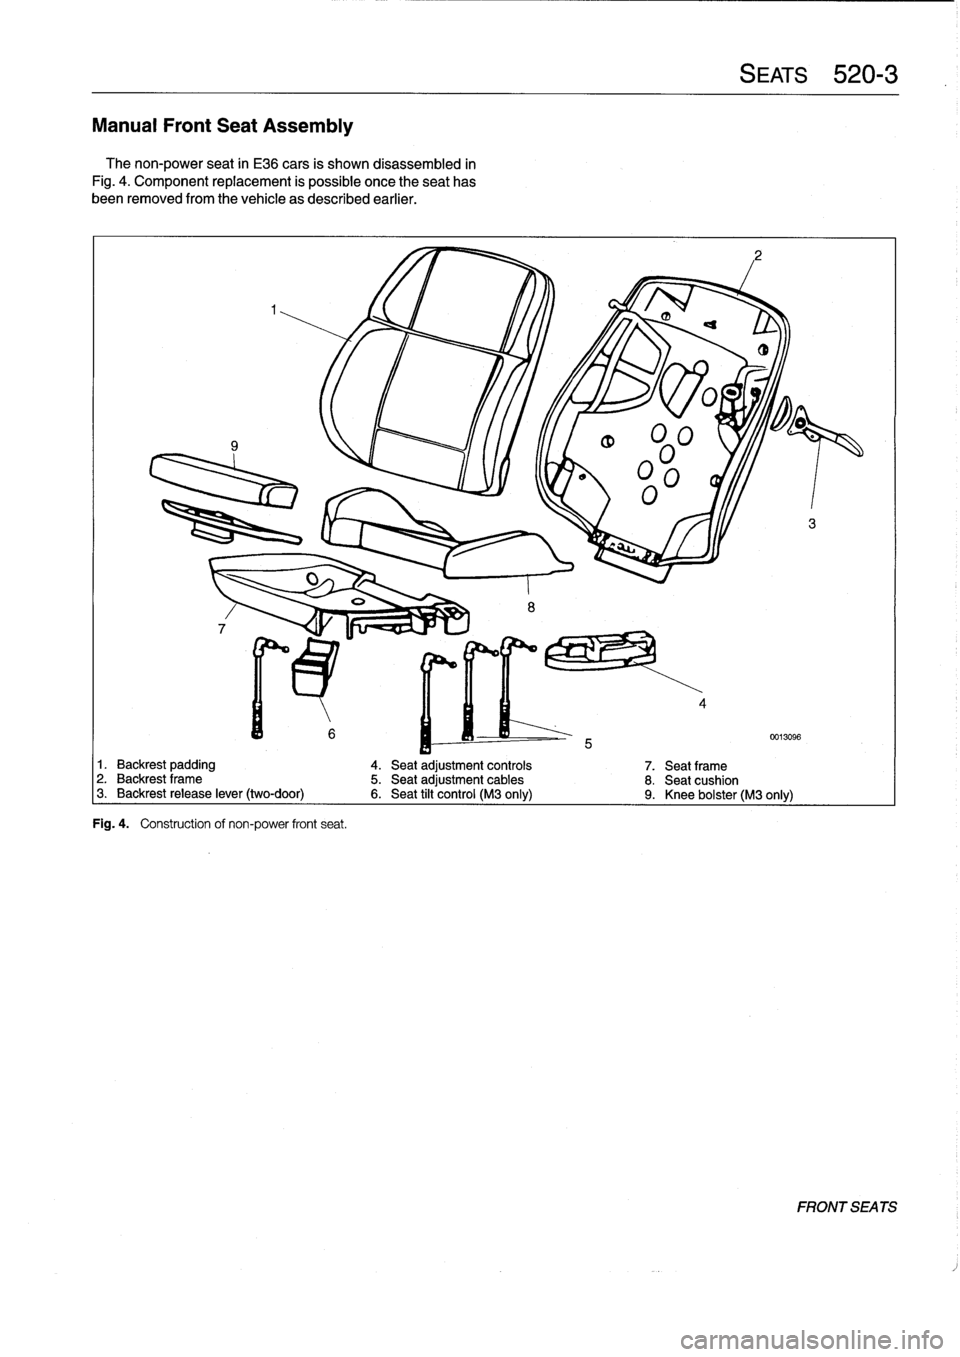 BMW 328i 1997 E36 Workshop Manual 
Manual
Front
Seat
Assembly

The
non-power
seat
in
E36
cars
is
shown
disassembled
in

Fig
.
4
.
Component
replacement
is
possible
once
theseat
has

been
removed
from
the
vehicle
as
described
earlier
.